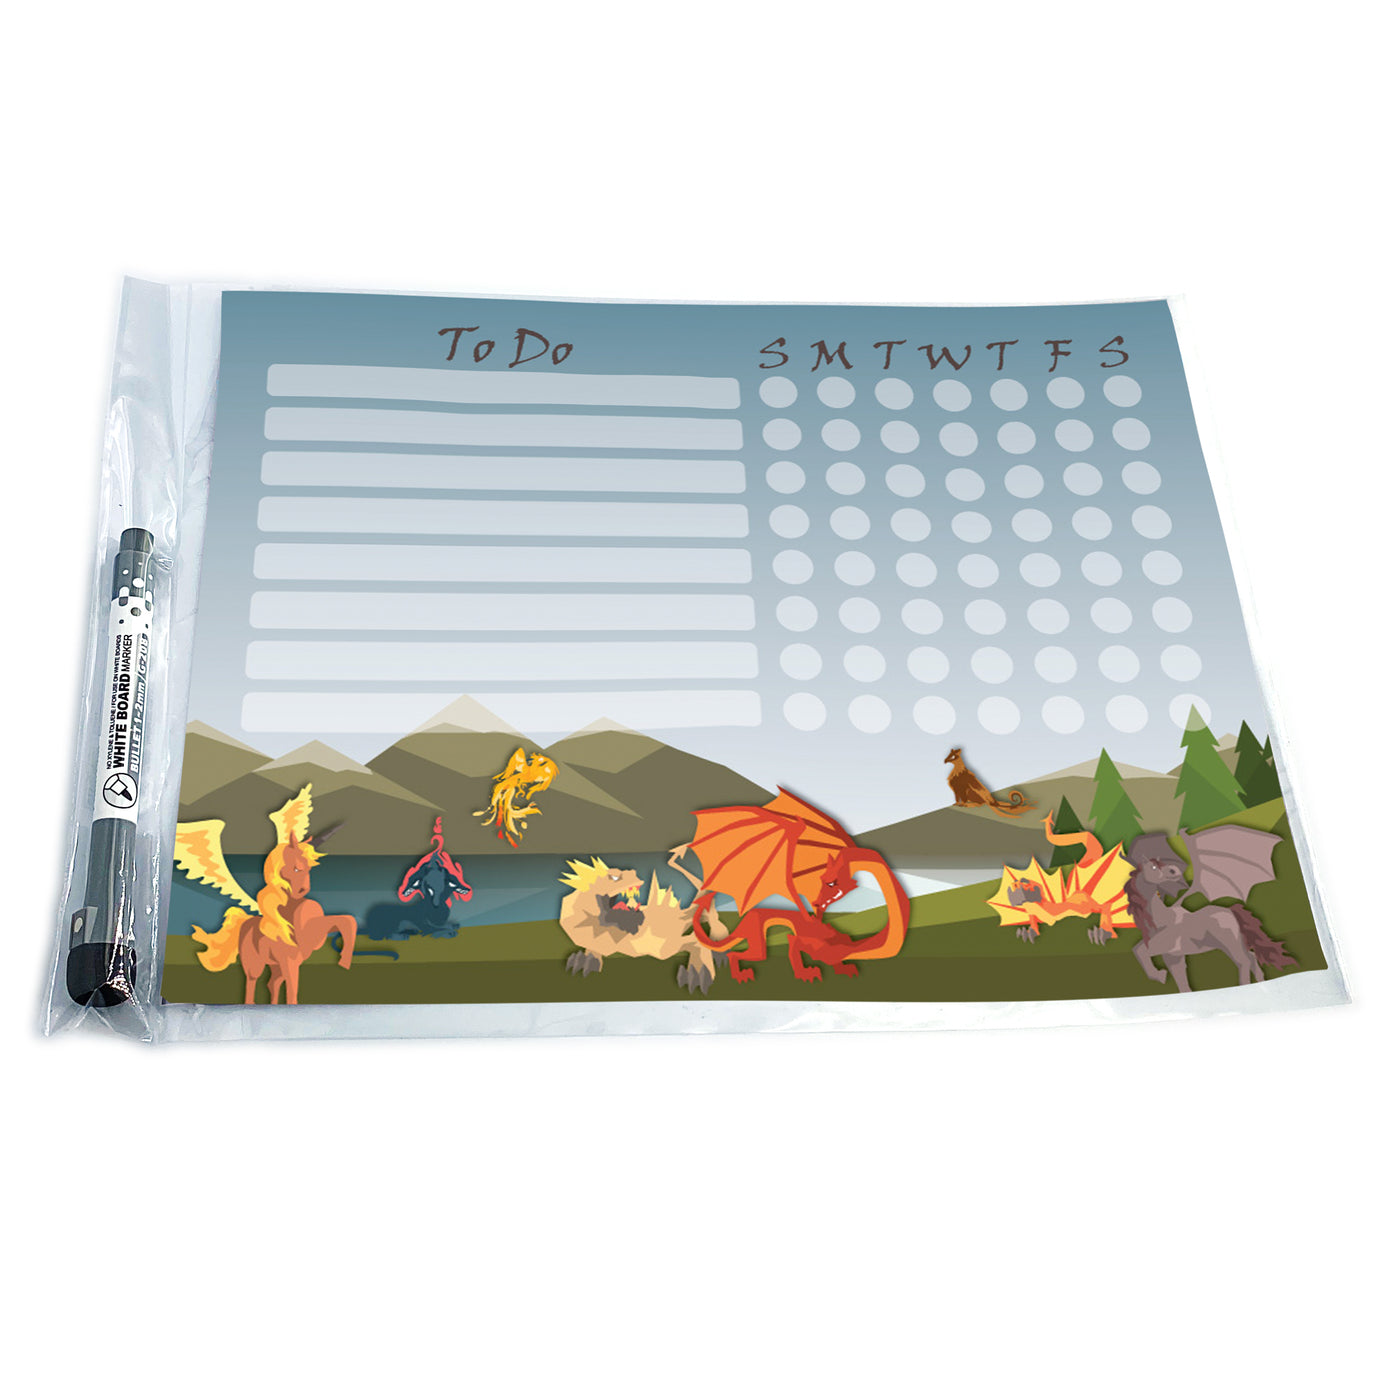 Mythical Creatures Kids Task Chart Sticker Doodles